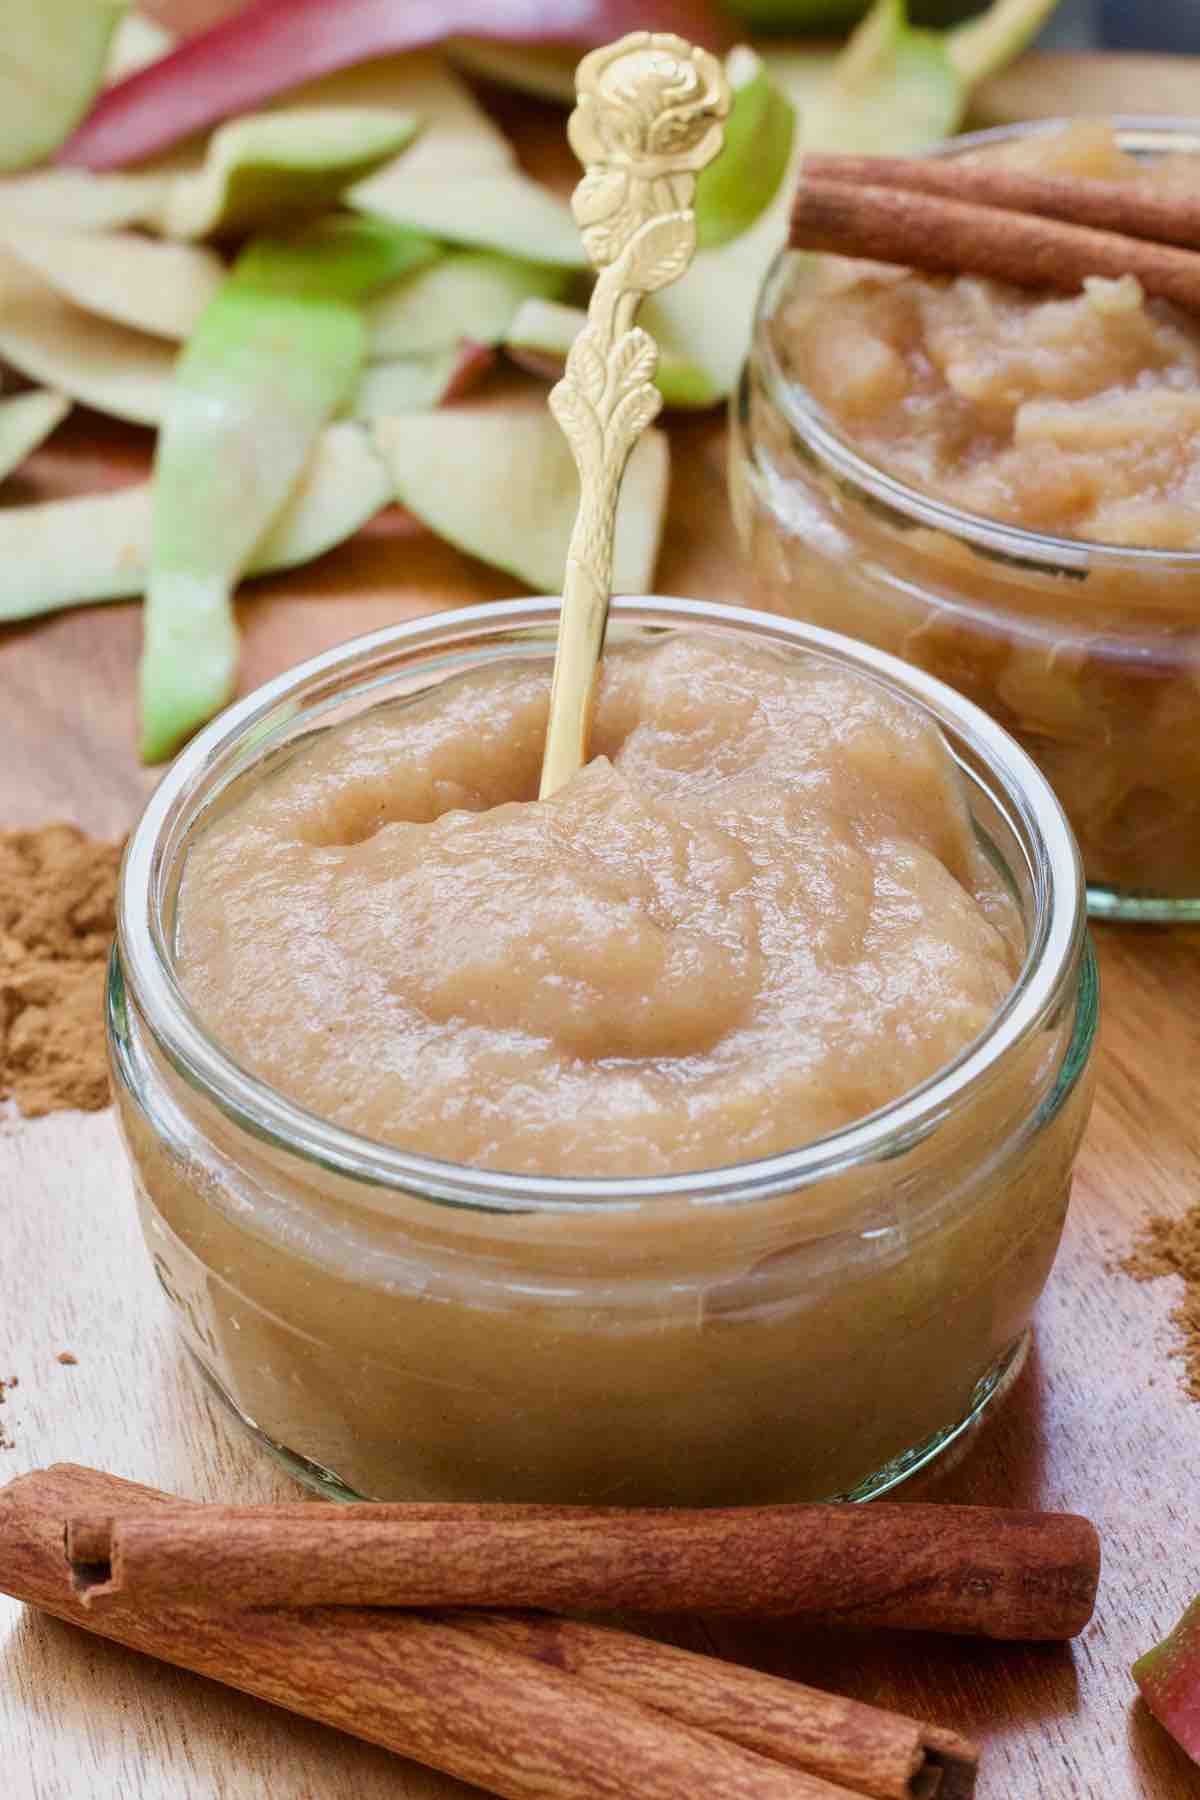 Smooth apple puree in a small dish with a spoon.